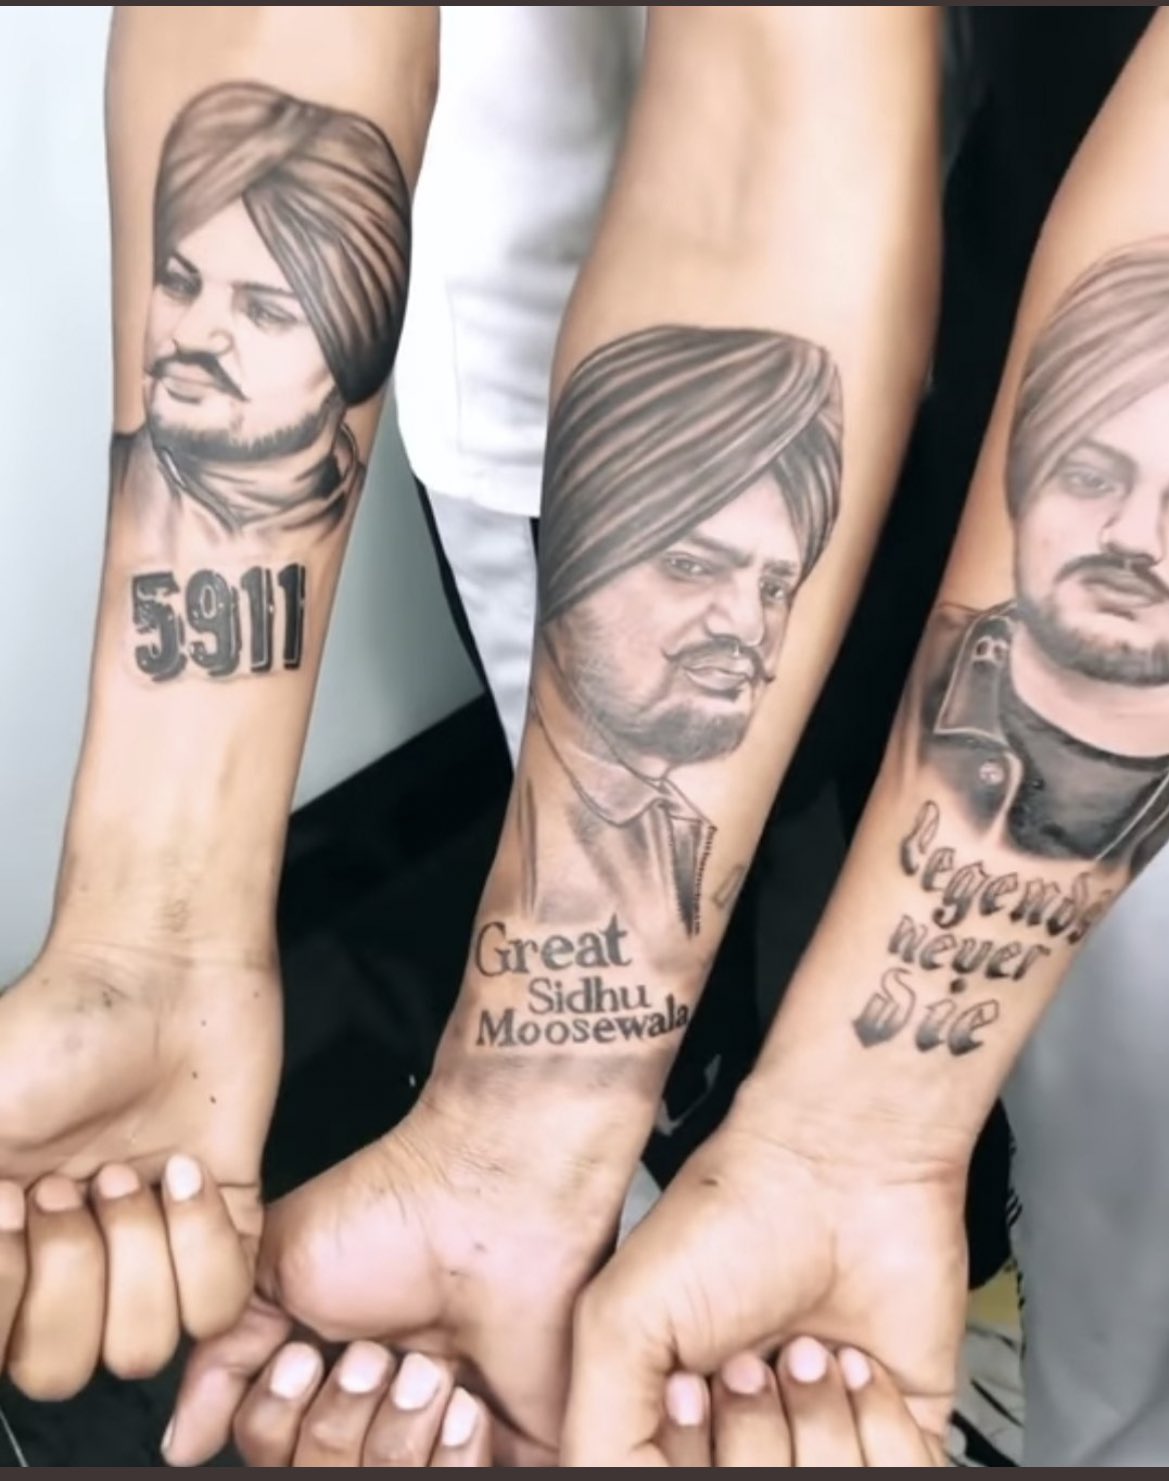 Sidhu Moose Wala's parents get tattooed to give tribute